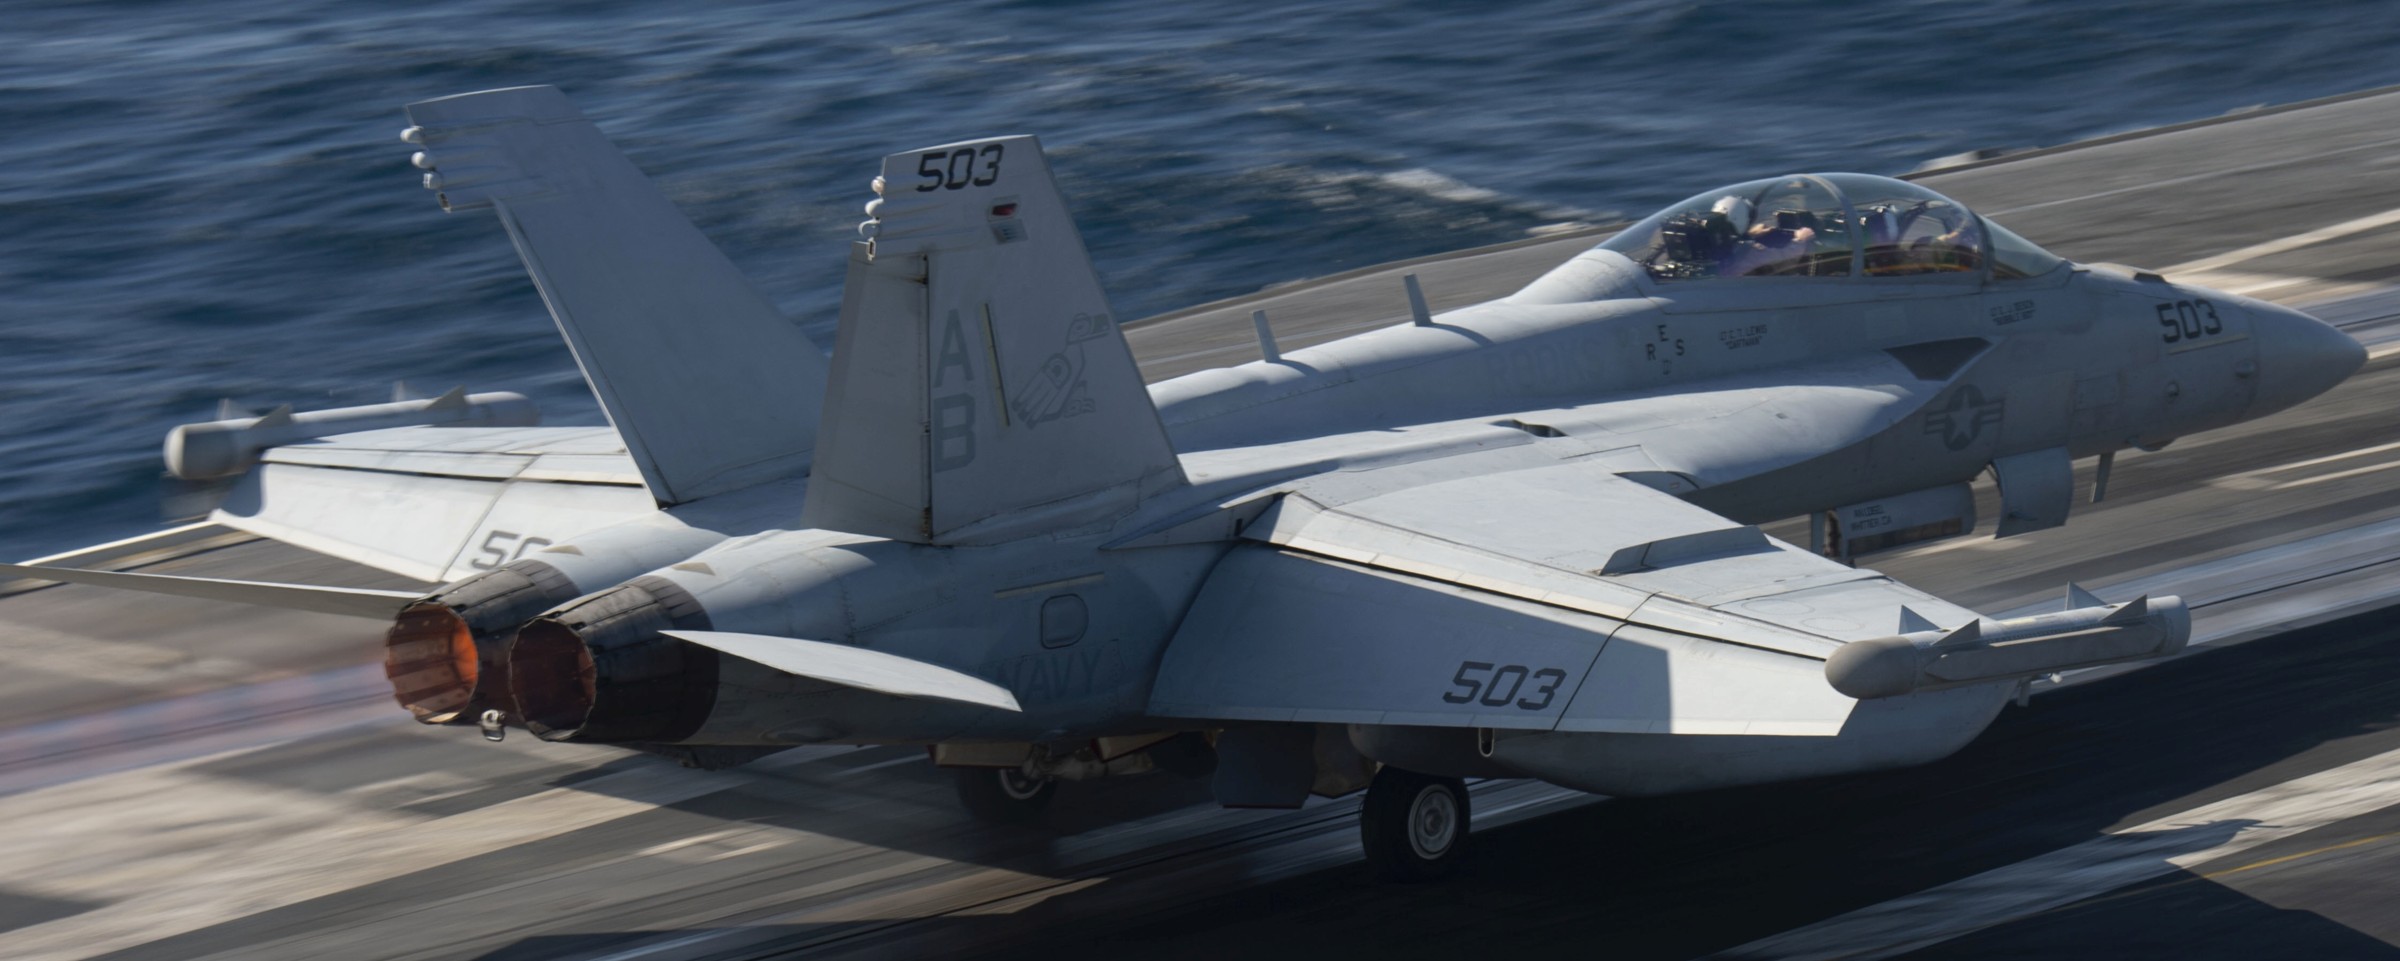 vaq-137 rooks electronic attack squadron us navy ea-18g growler carrier air wing cvw-1 uss harry s. truman cvn-75 86